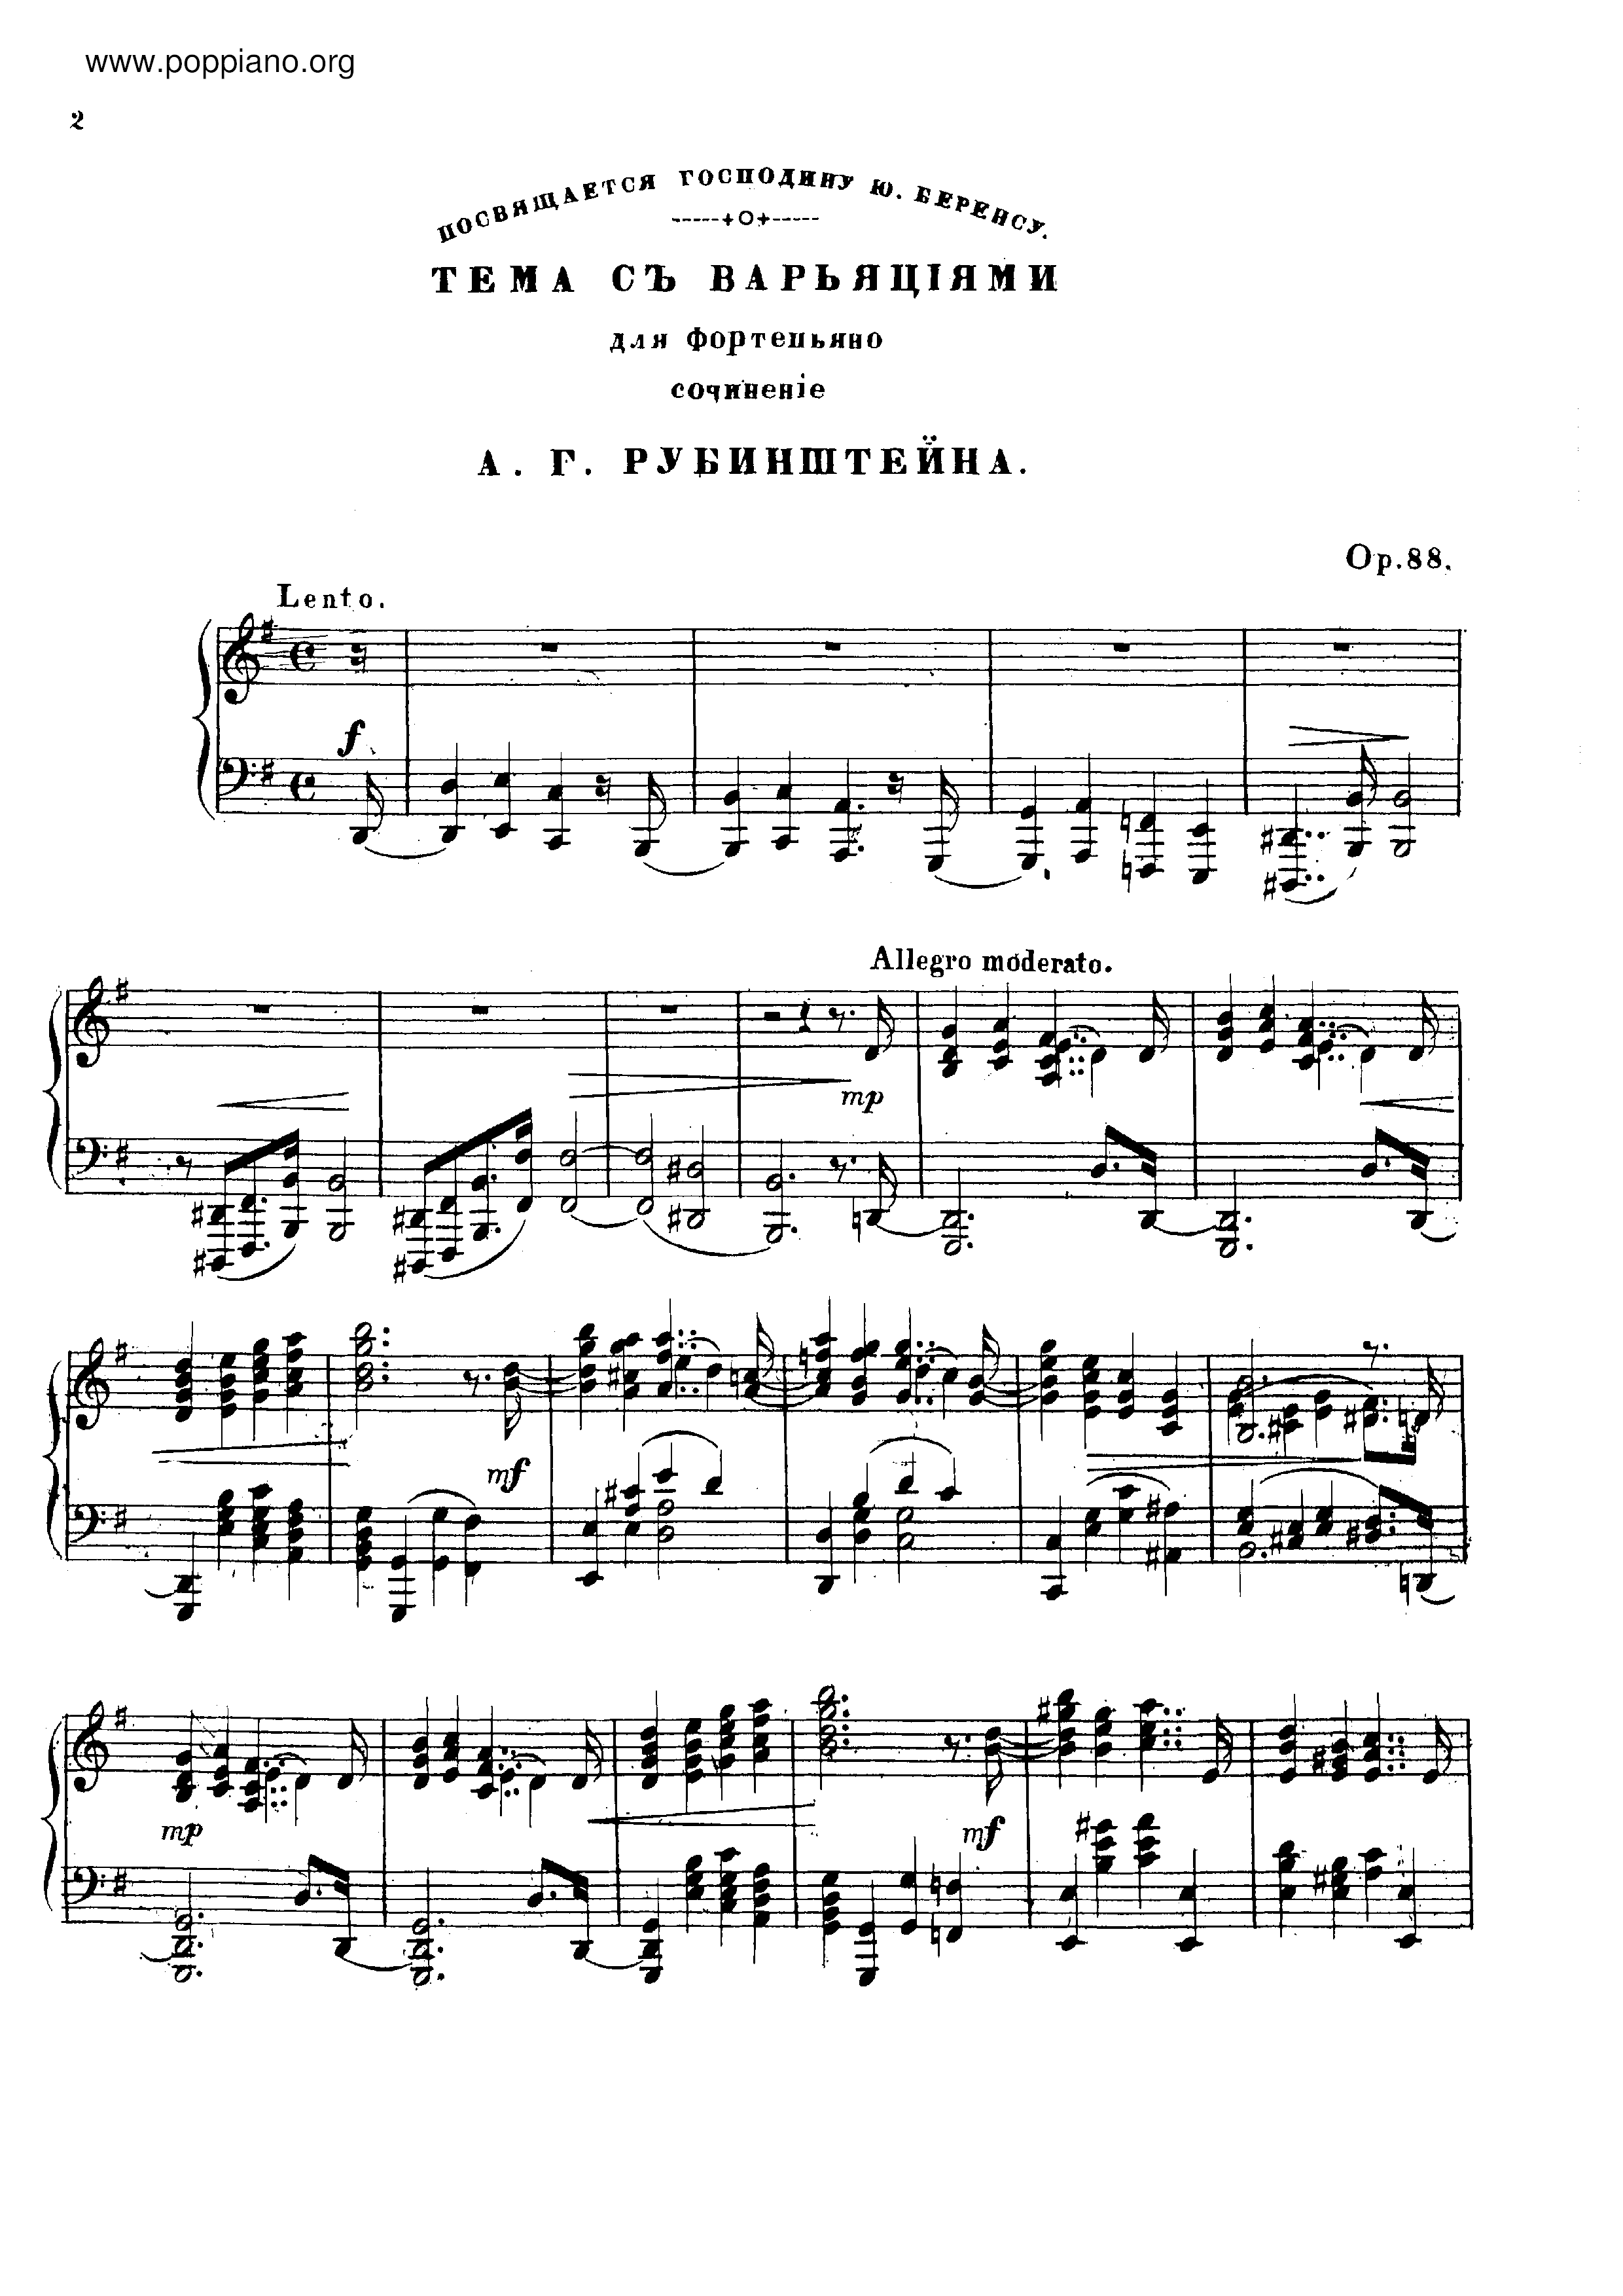 Theme and Variations, Op.88琴譜